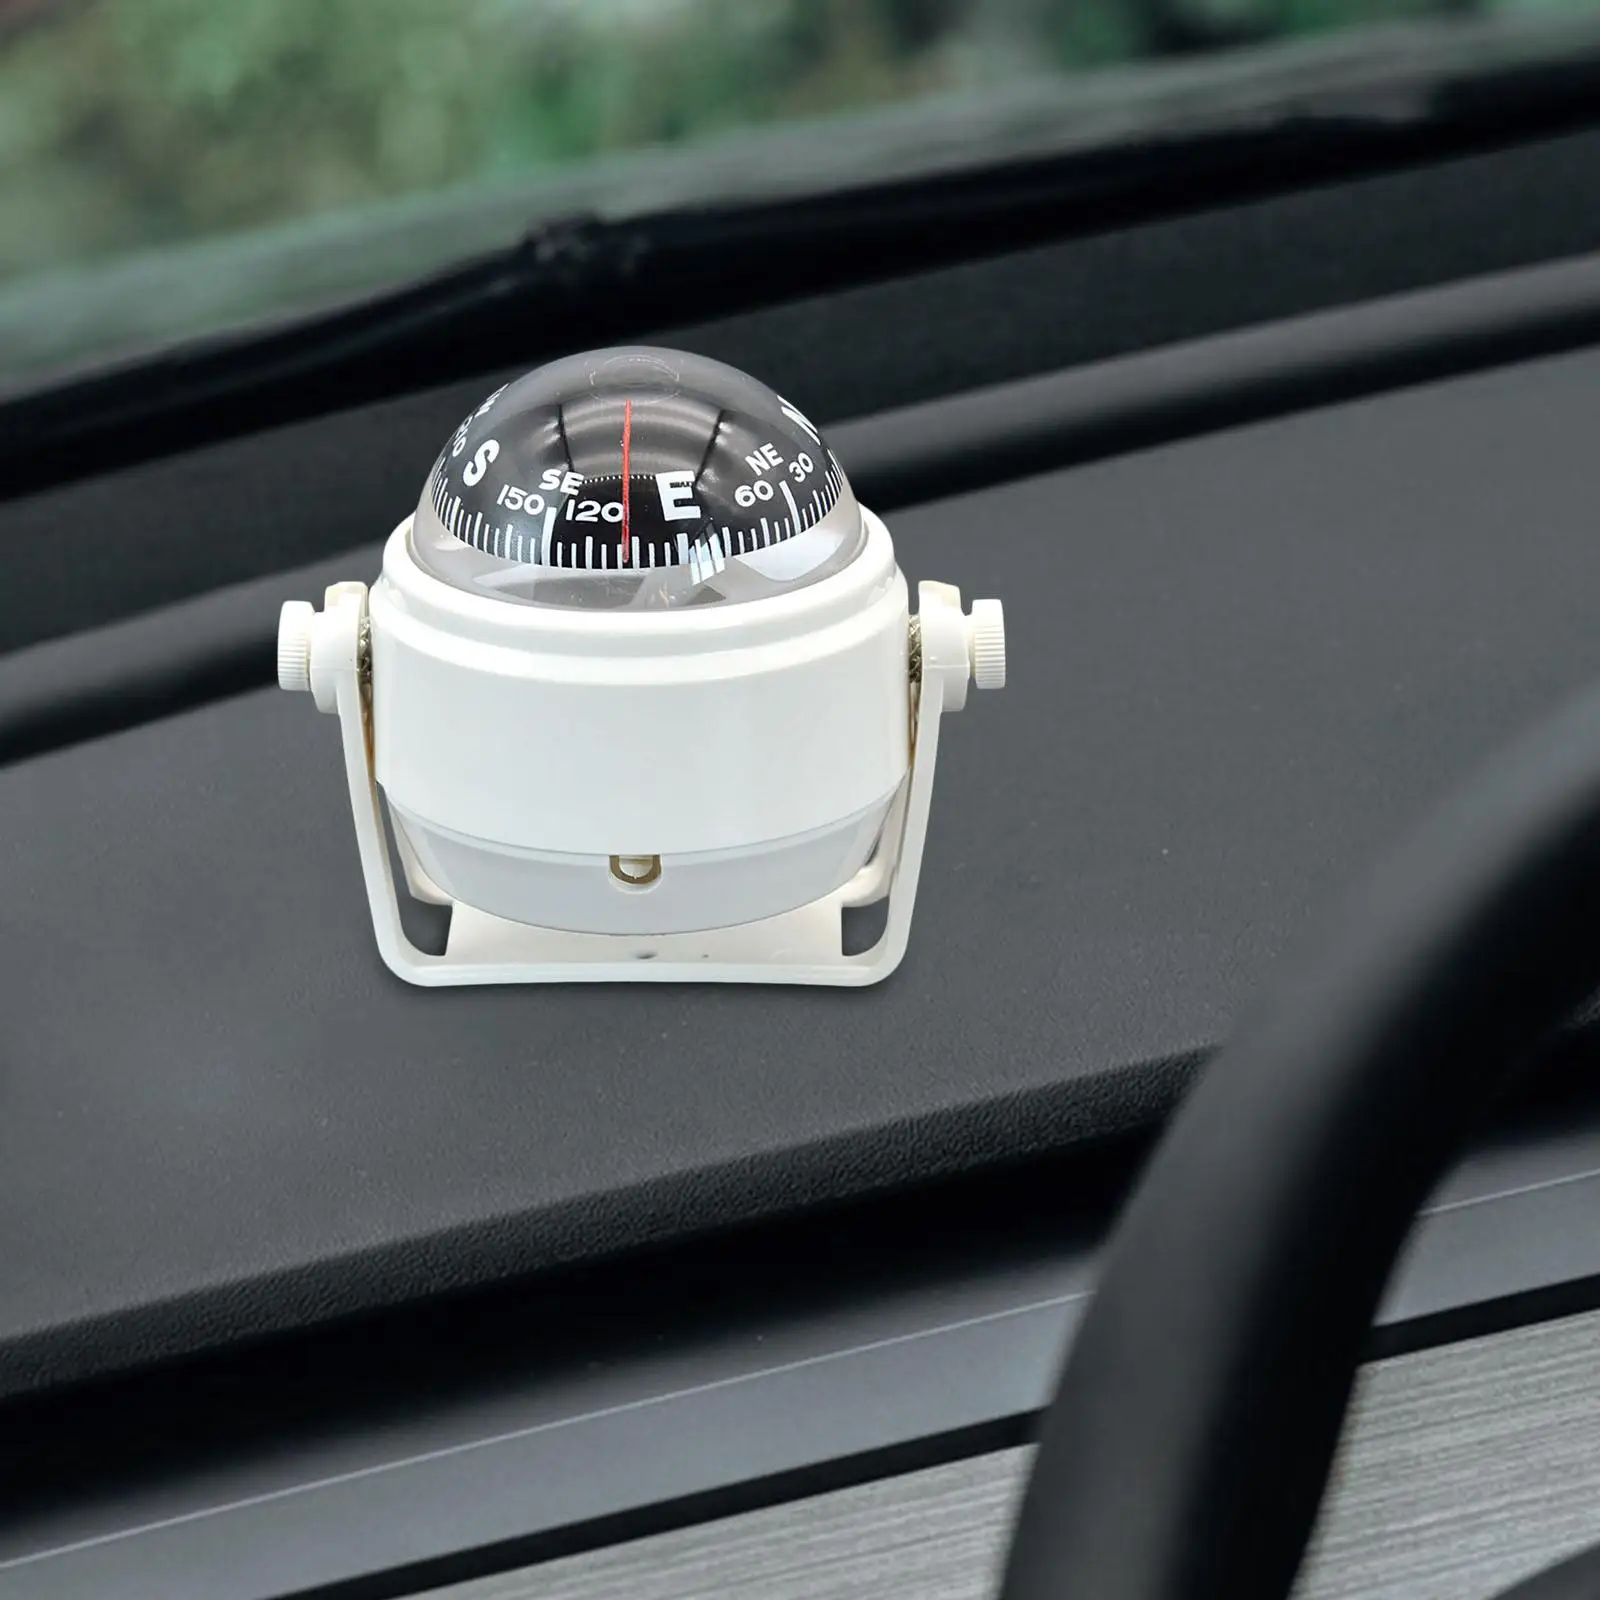 Car Compass Ball Navigation Direction Pointing  for Boat Marine Vehicle